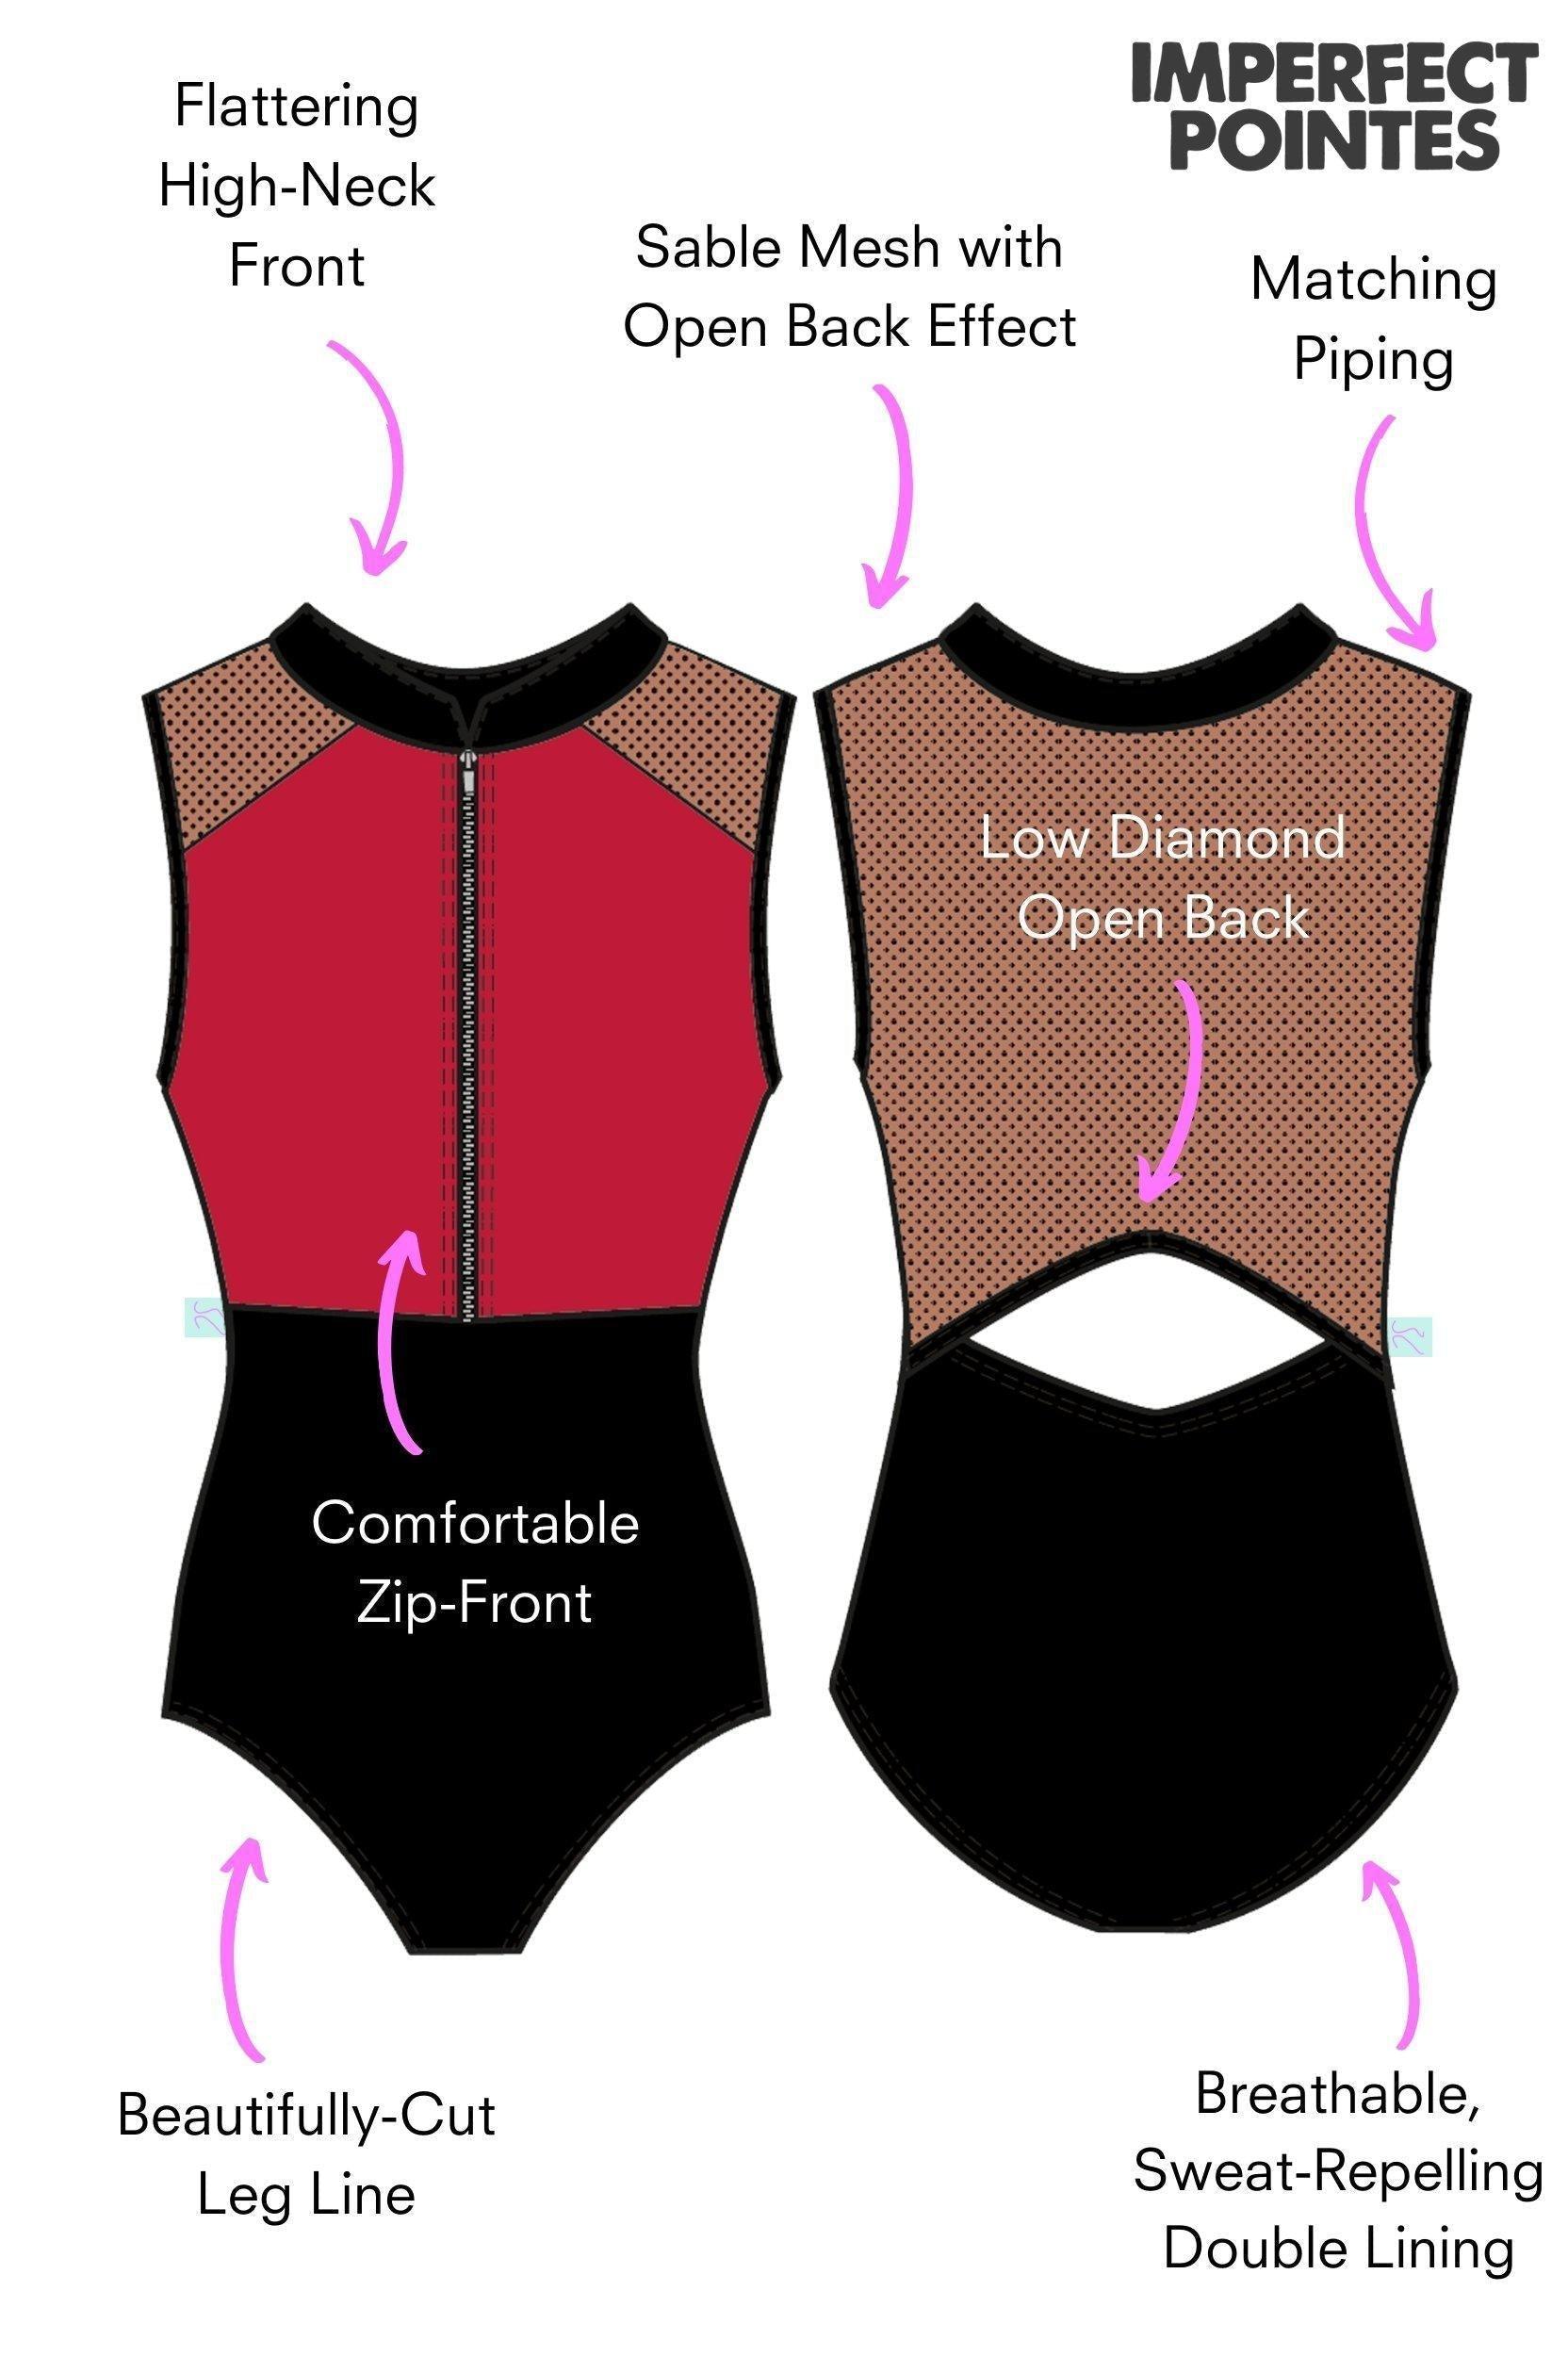 Women's Tuscany Zip Front Leotard - Sporty Red & Black-Women's Leotard-XS-Imperfect Pointes